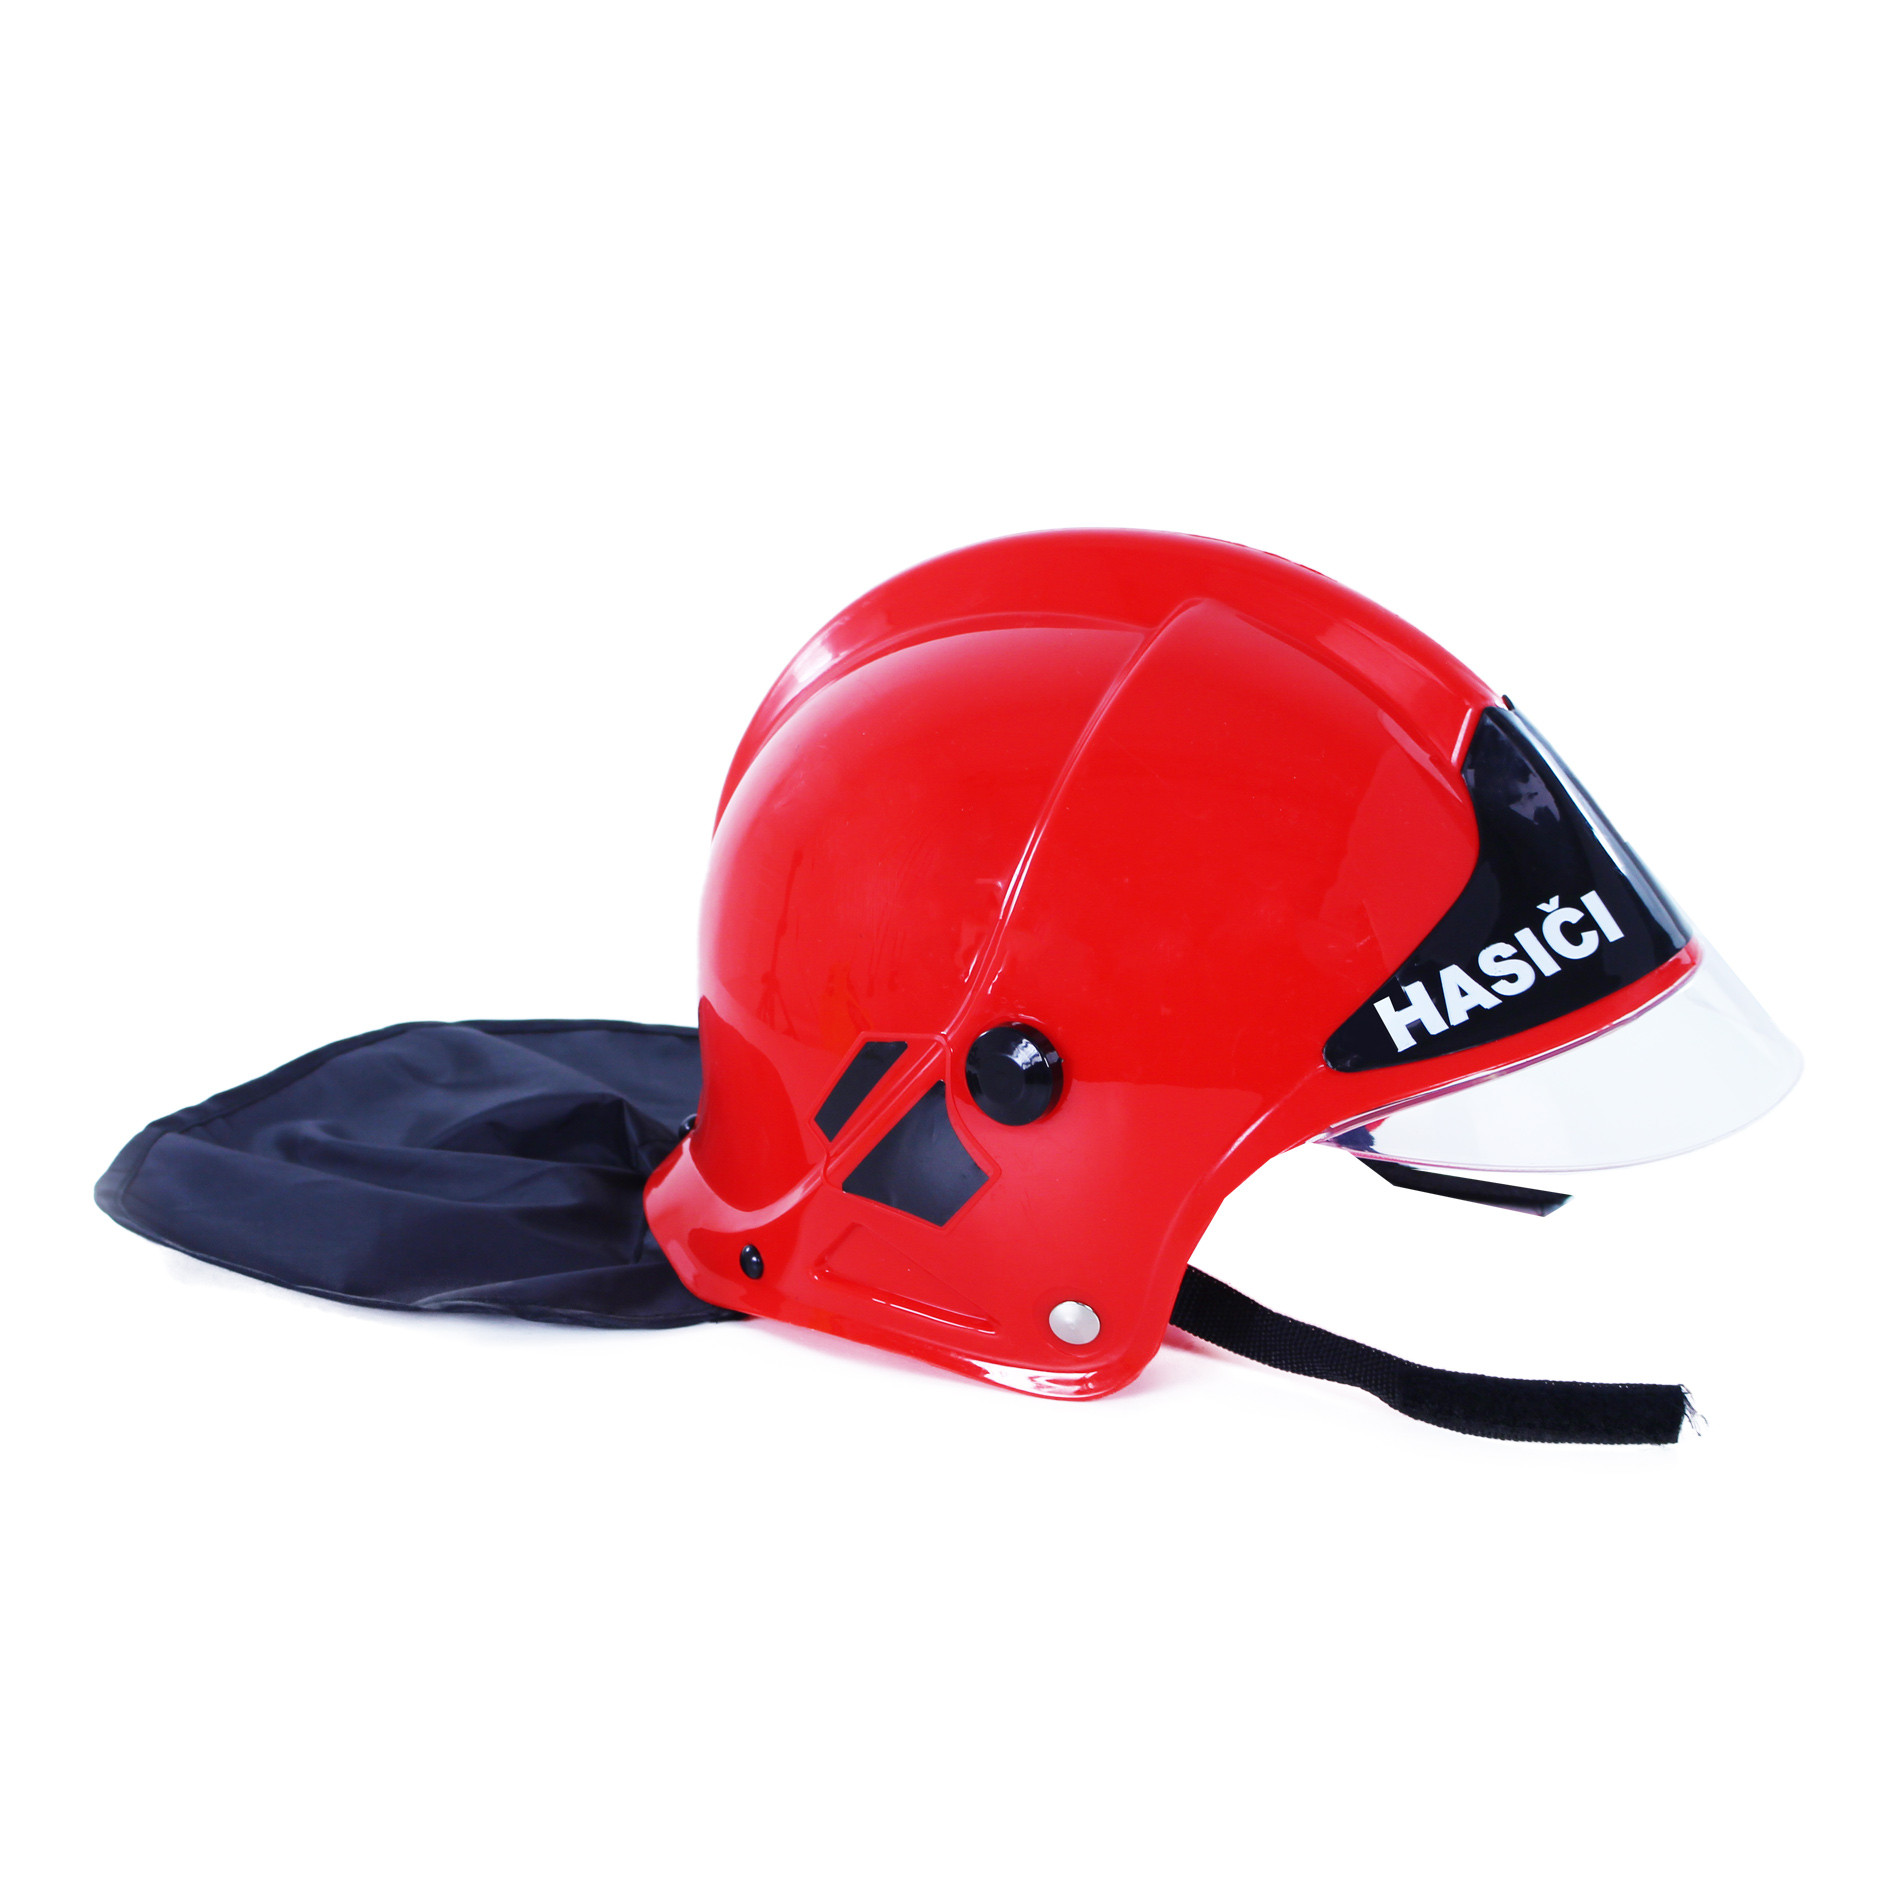 the Childrens fire helmet red